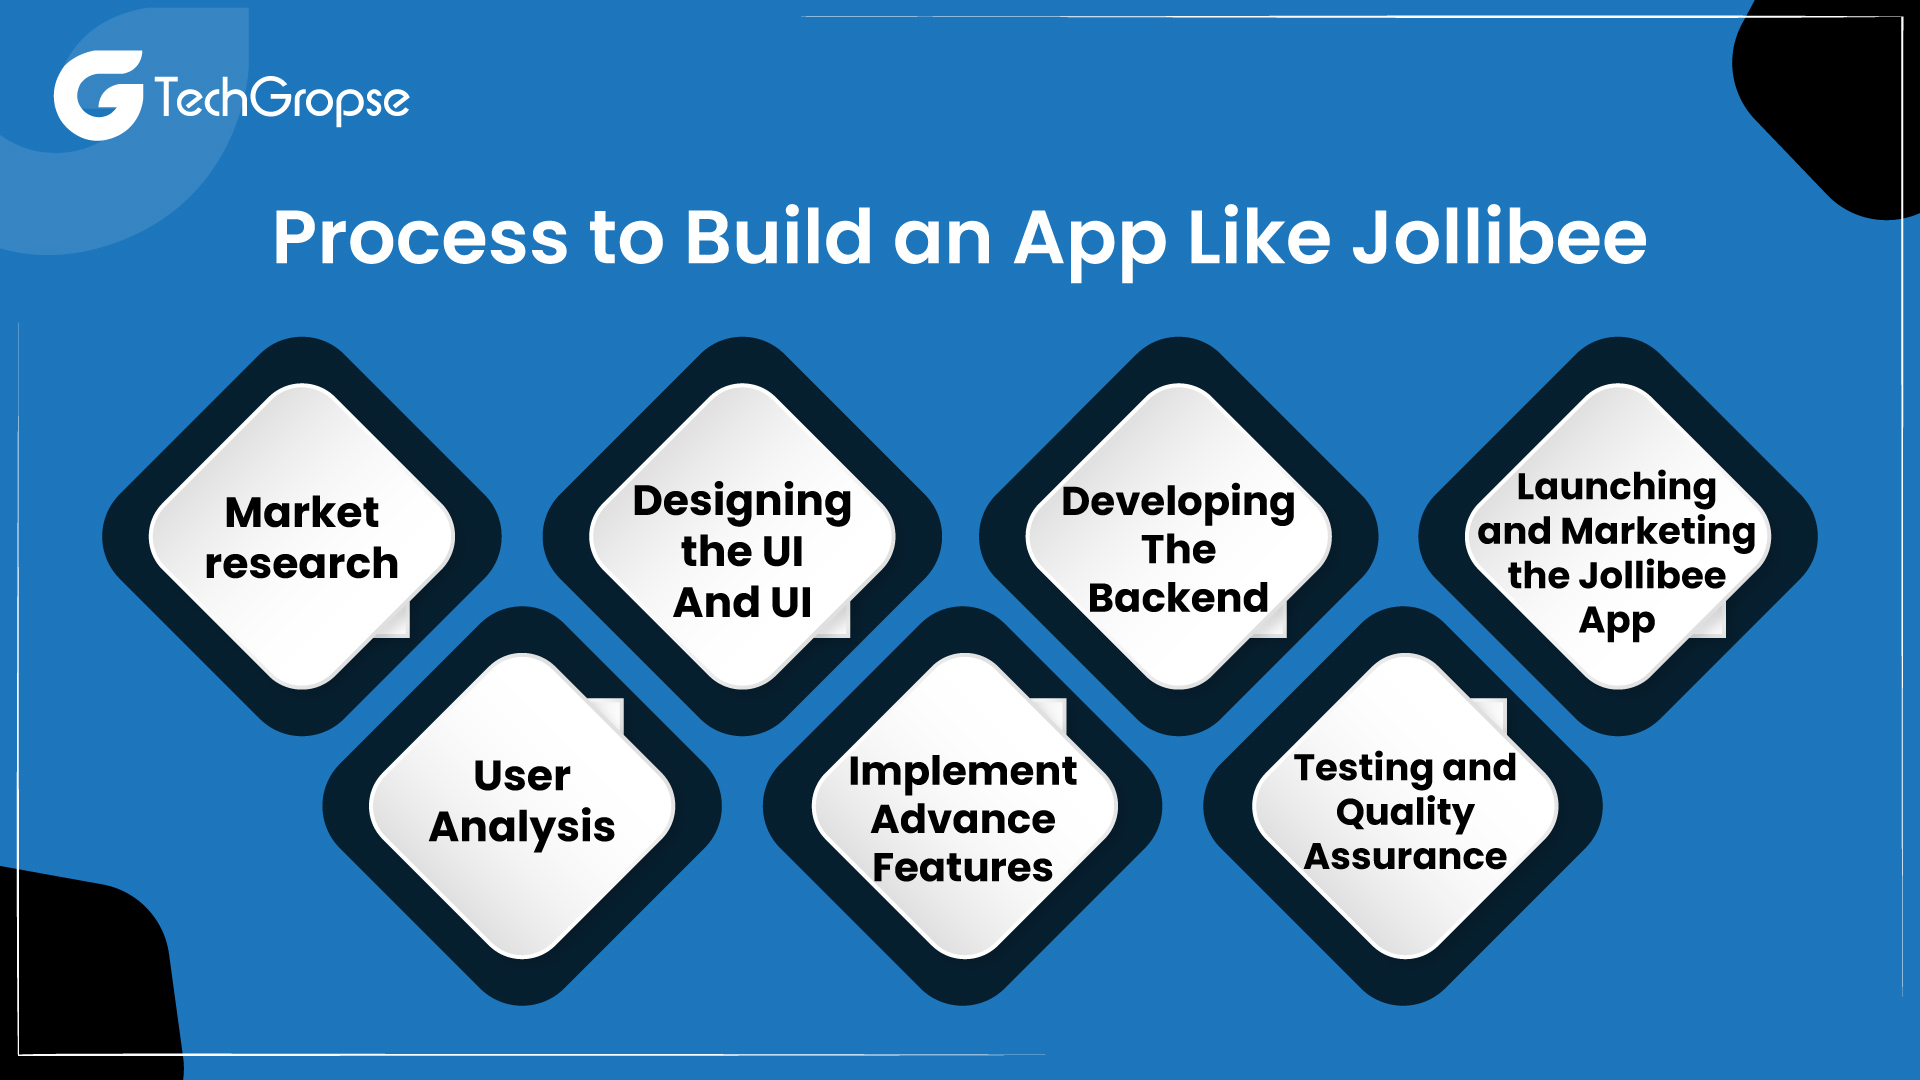 What is the Proces to Build an App Like Jollibee